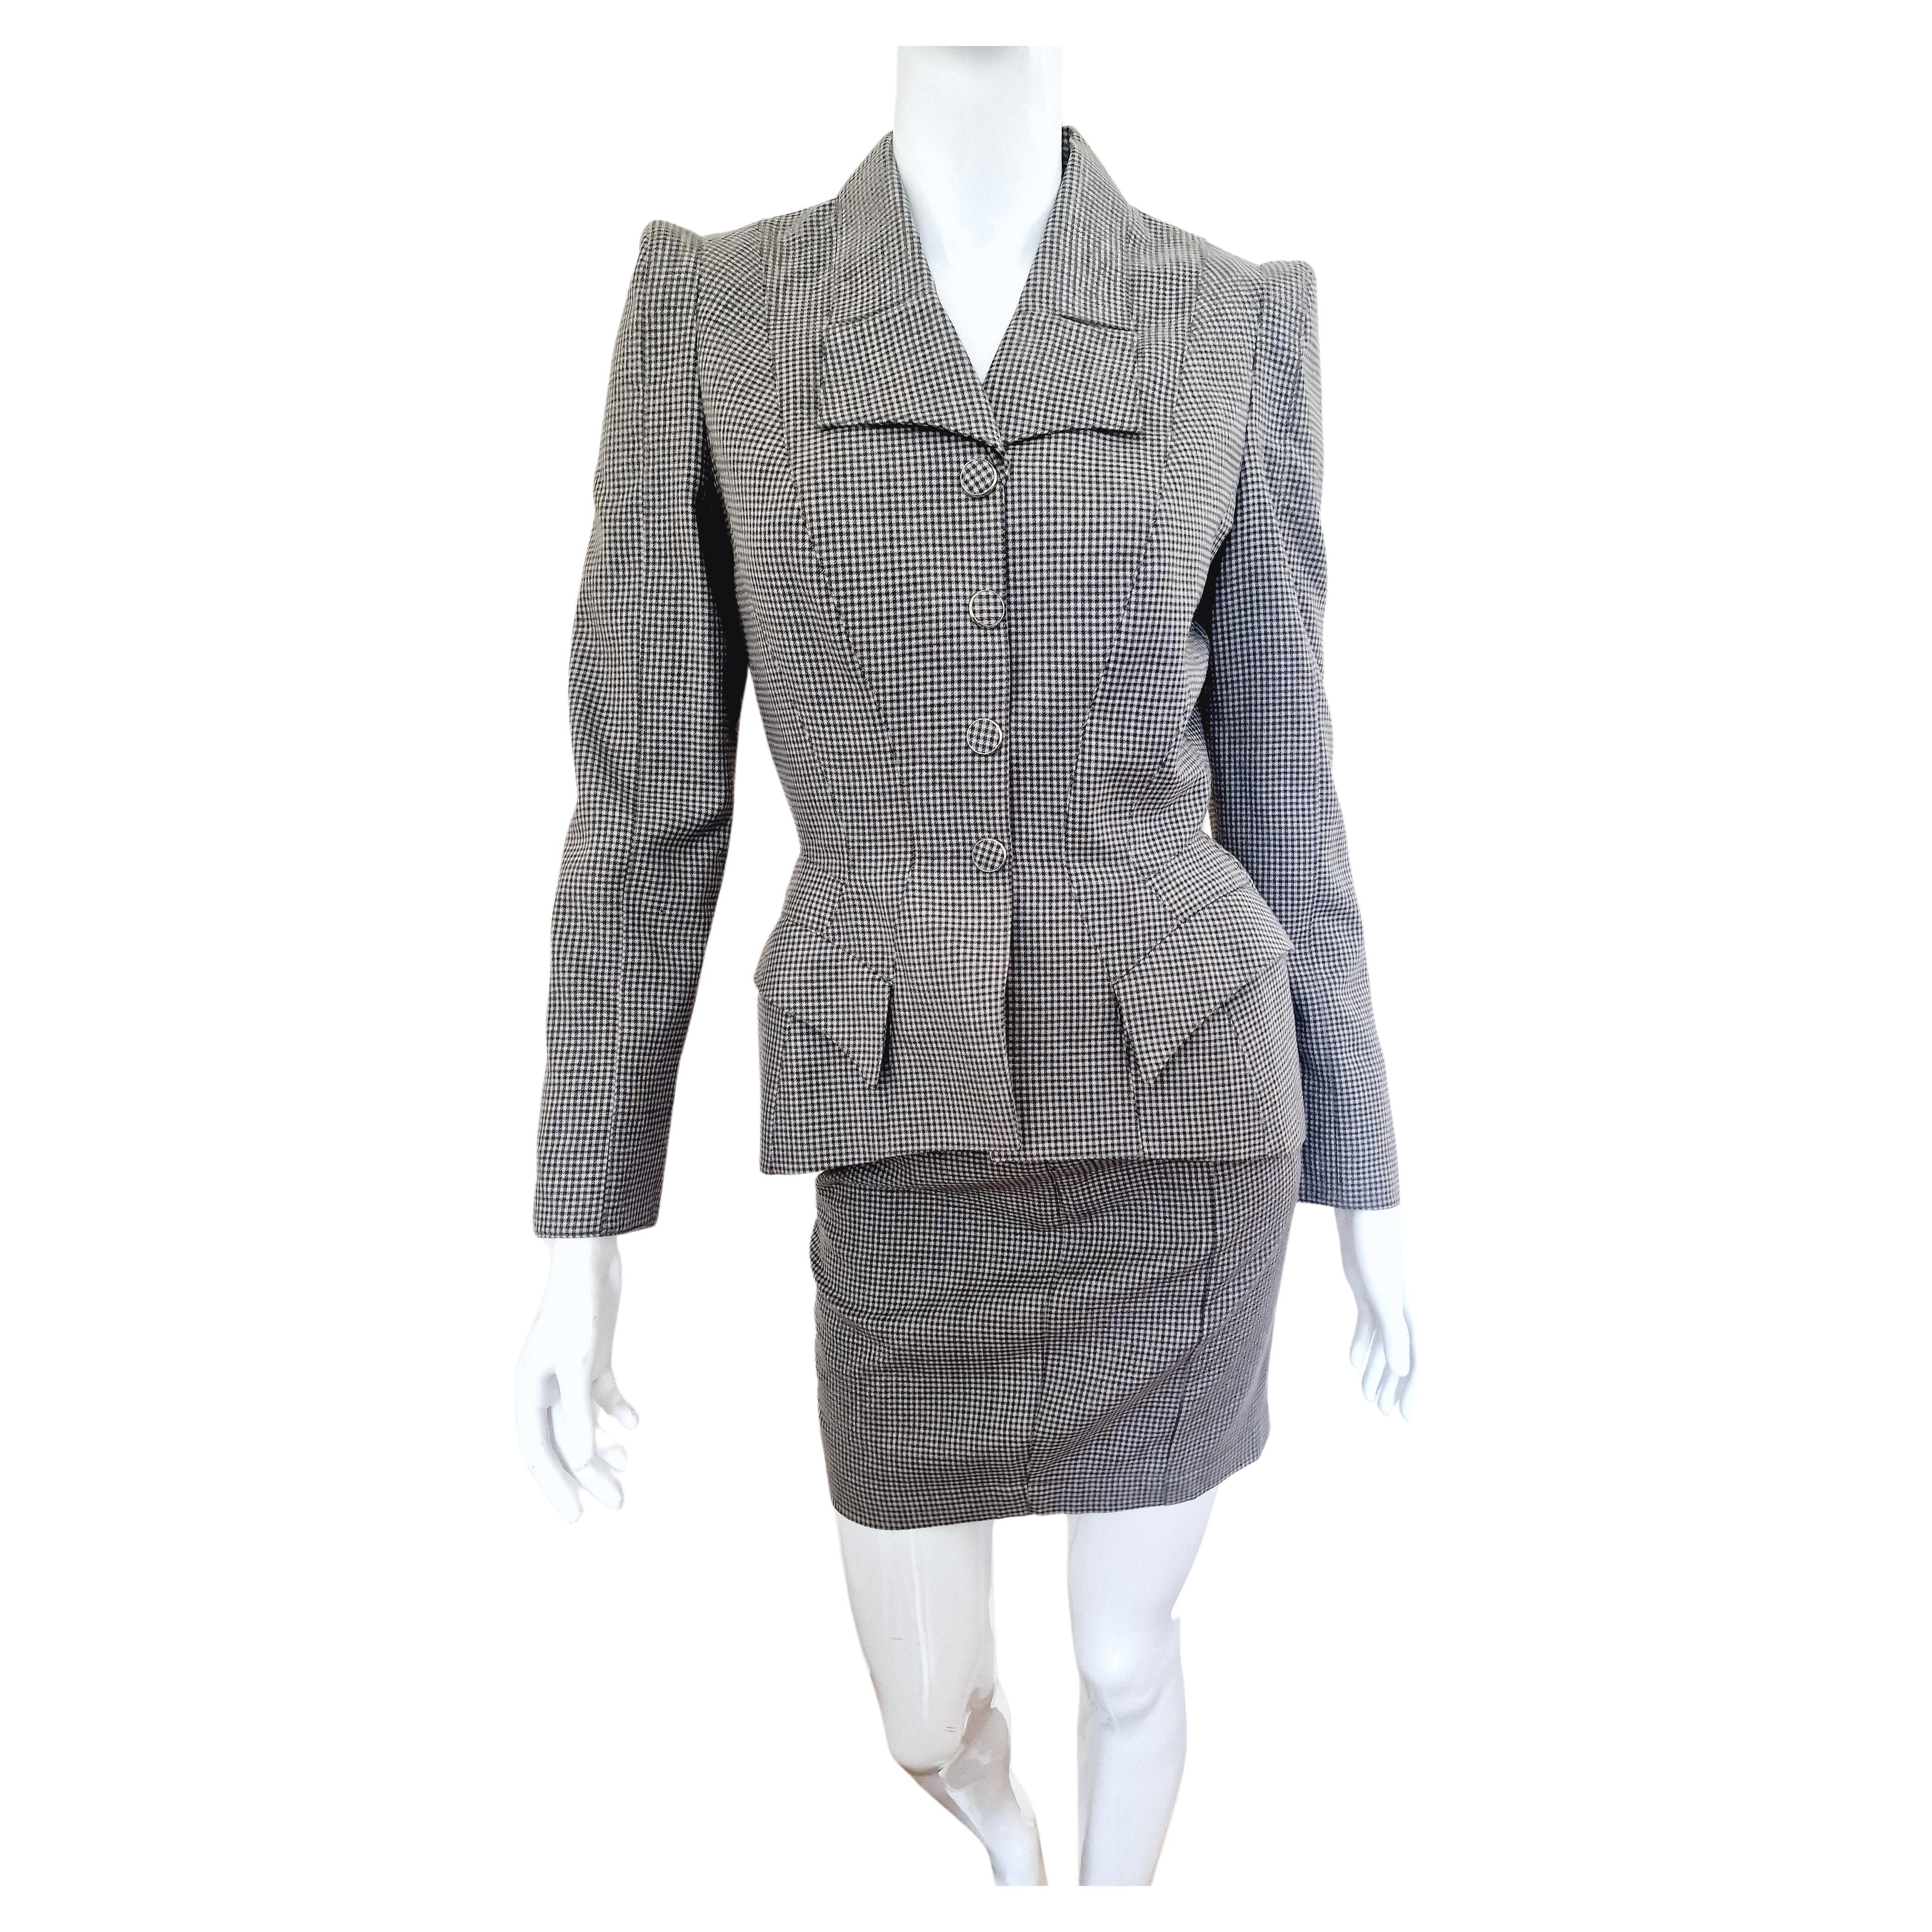 Thierry Mugler Houndstooth Check Evening Vampire XS Dress Set Jacket Skirt Suit For Sale